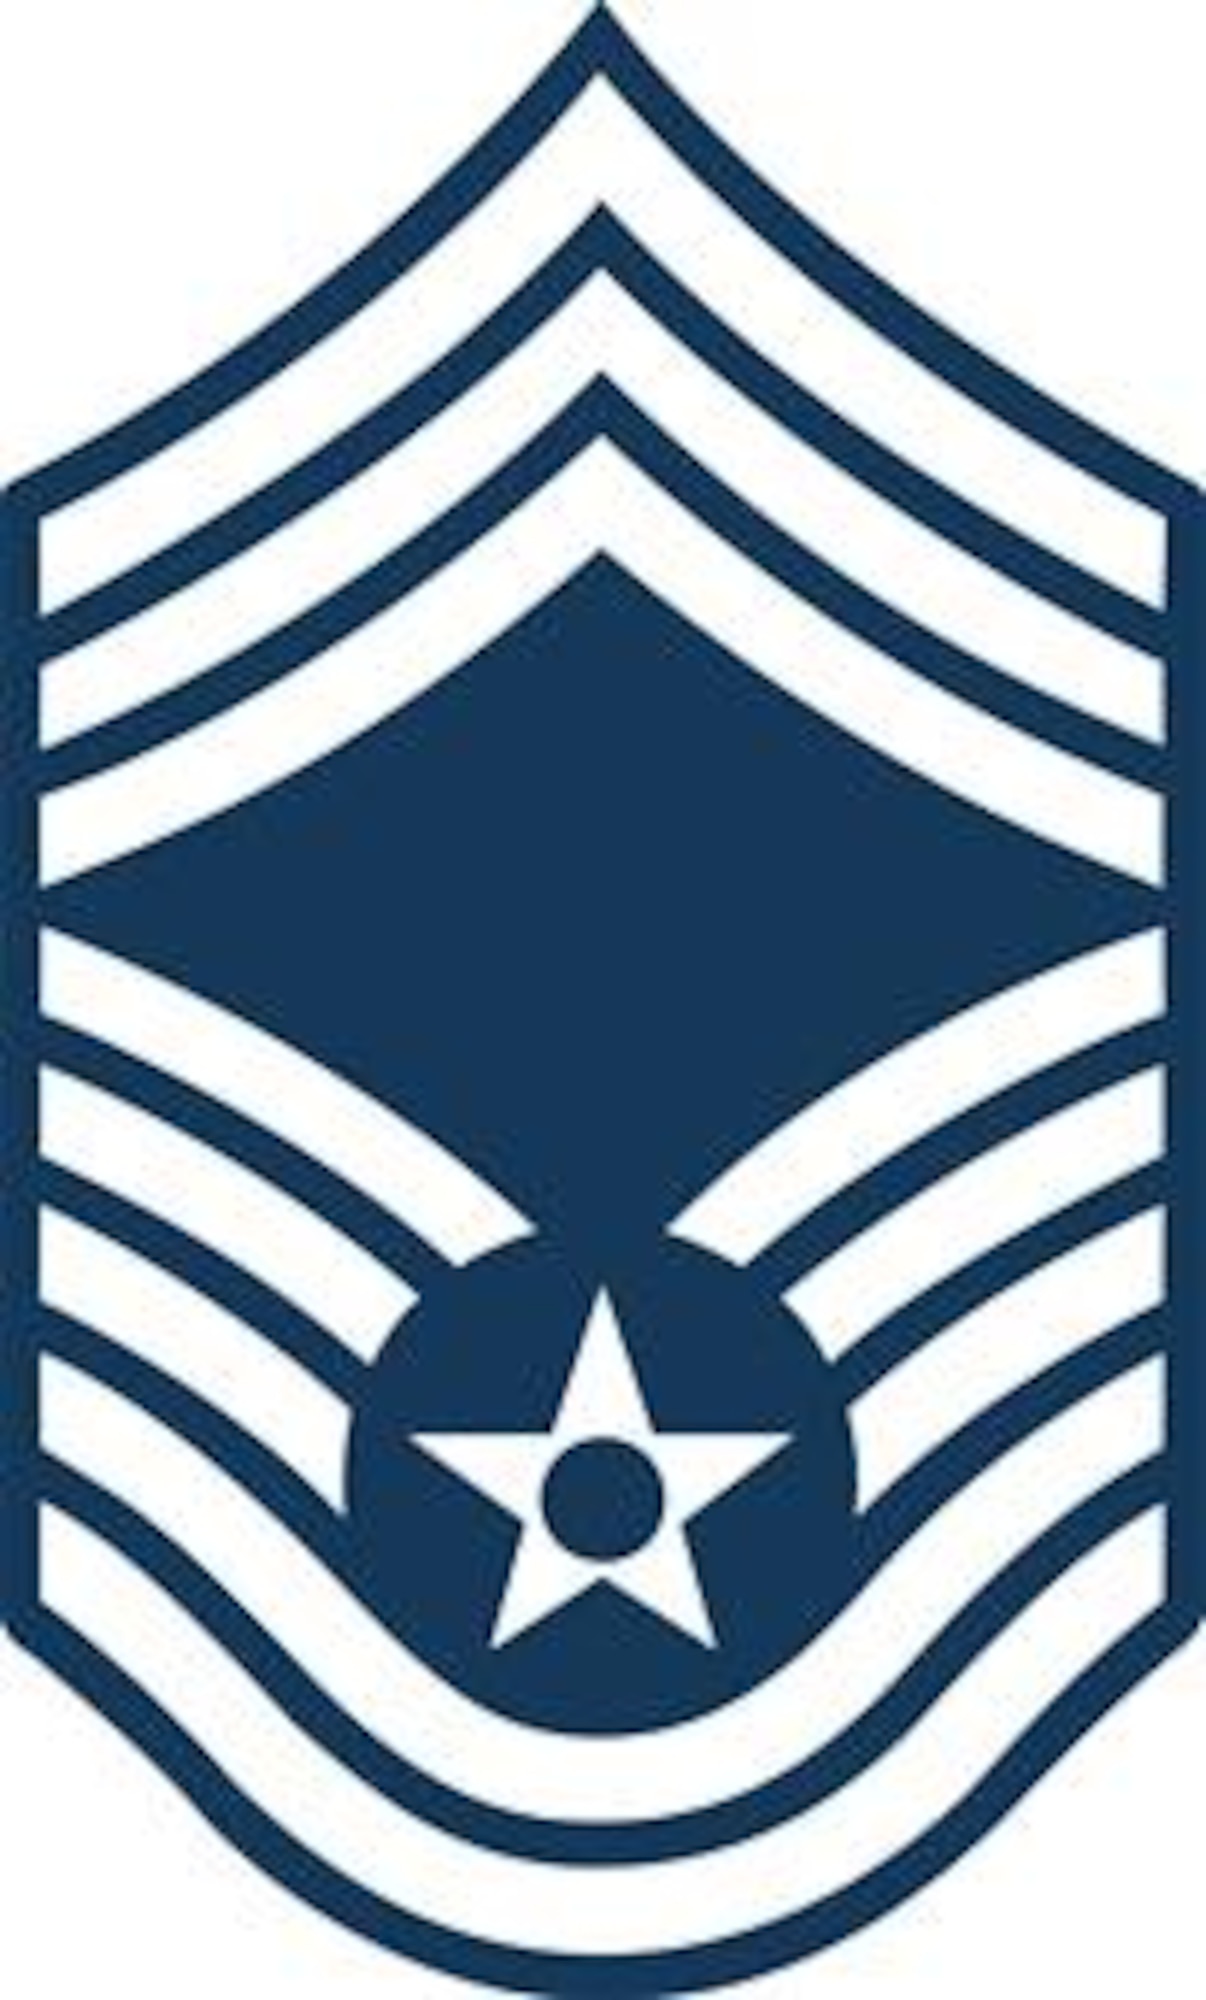 Chief Master Sergeant, E-9 (Blue color), U.S. Air Force graphic